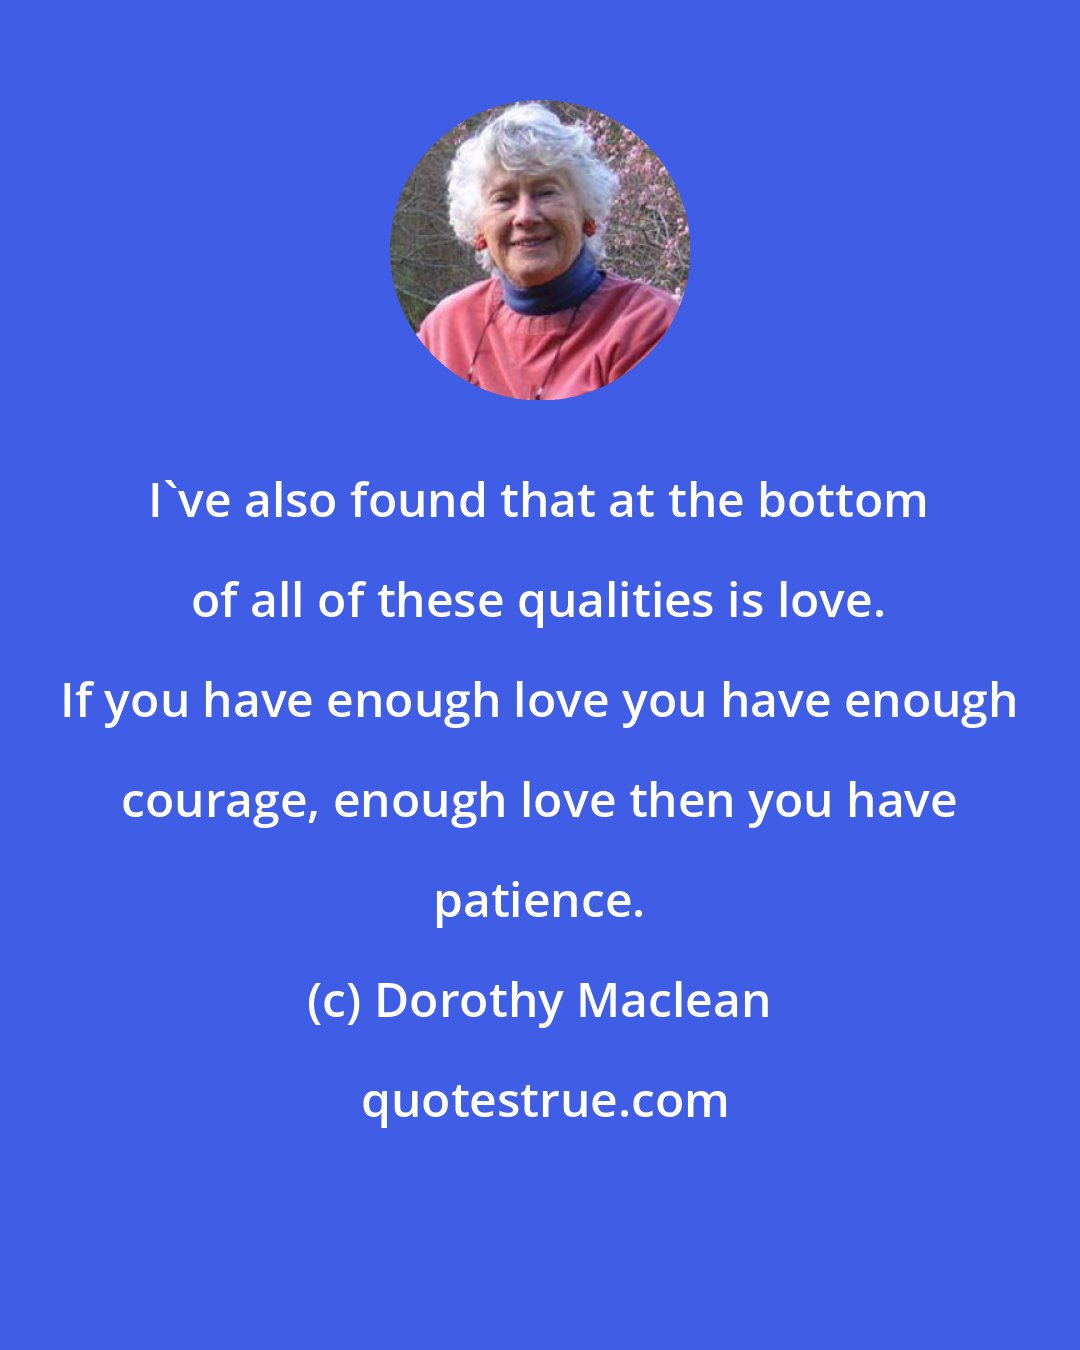 Dorothy Maclean: I've also found that at the bottom of all of these qualities is love. If you have enough love you have enough courage, enough love then you have patience.